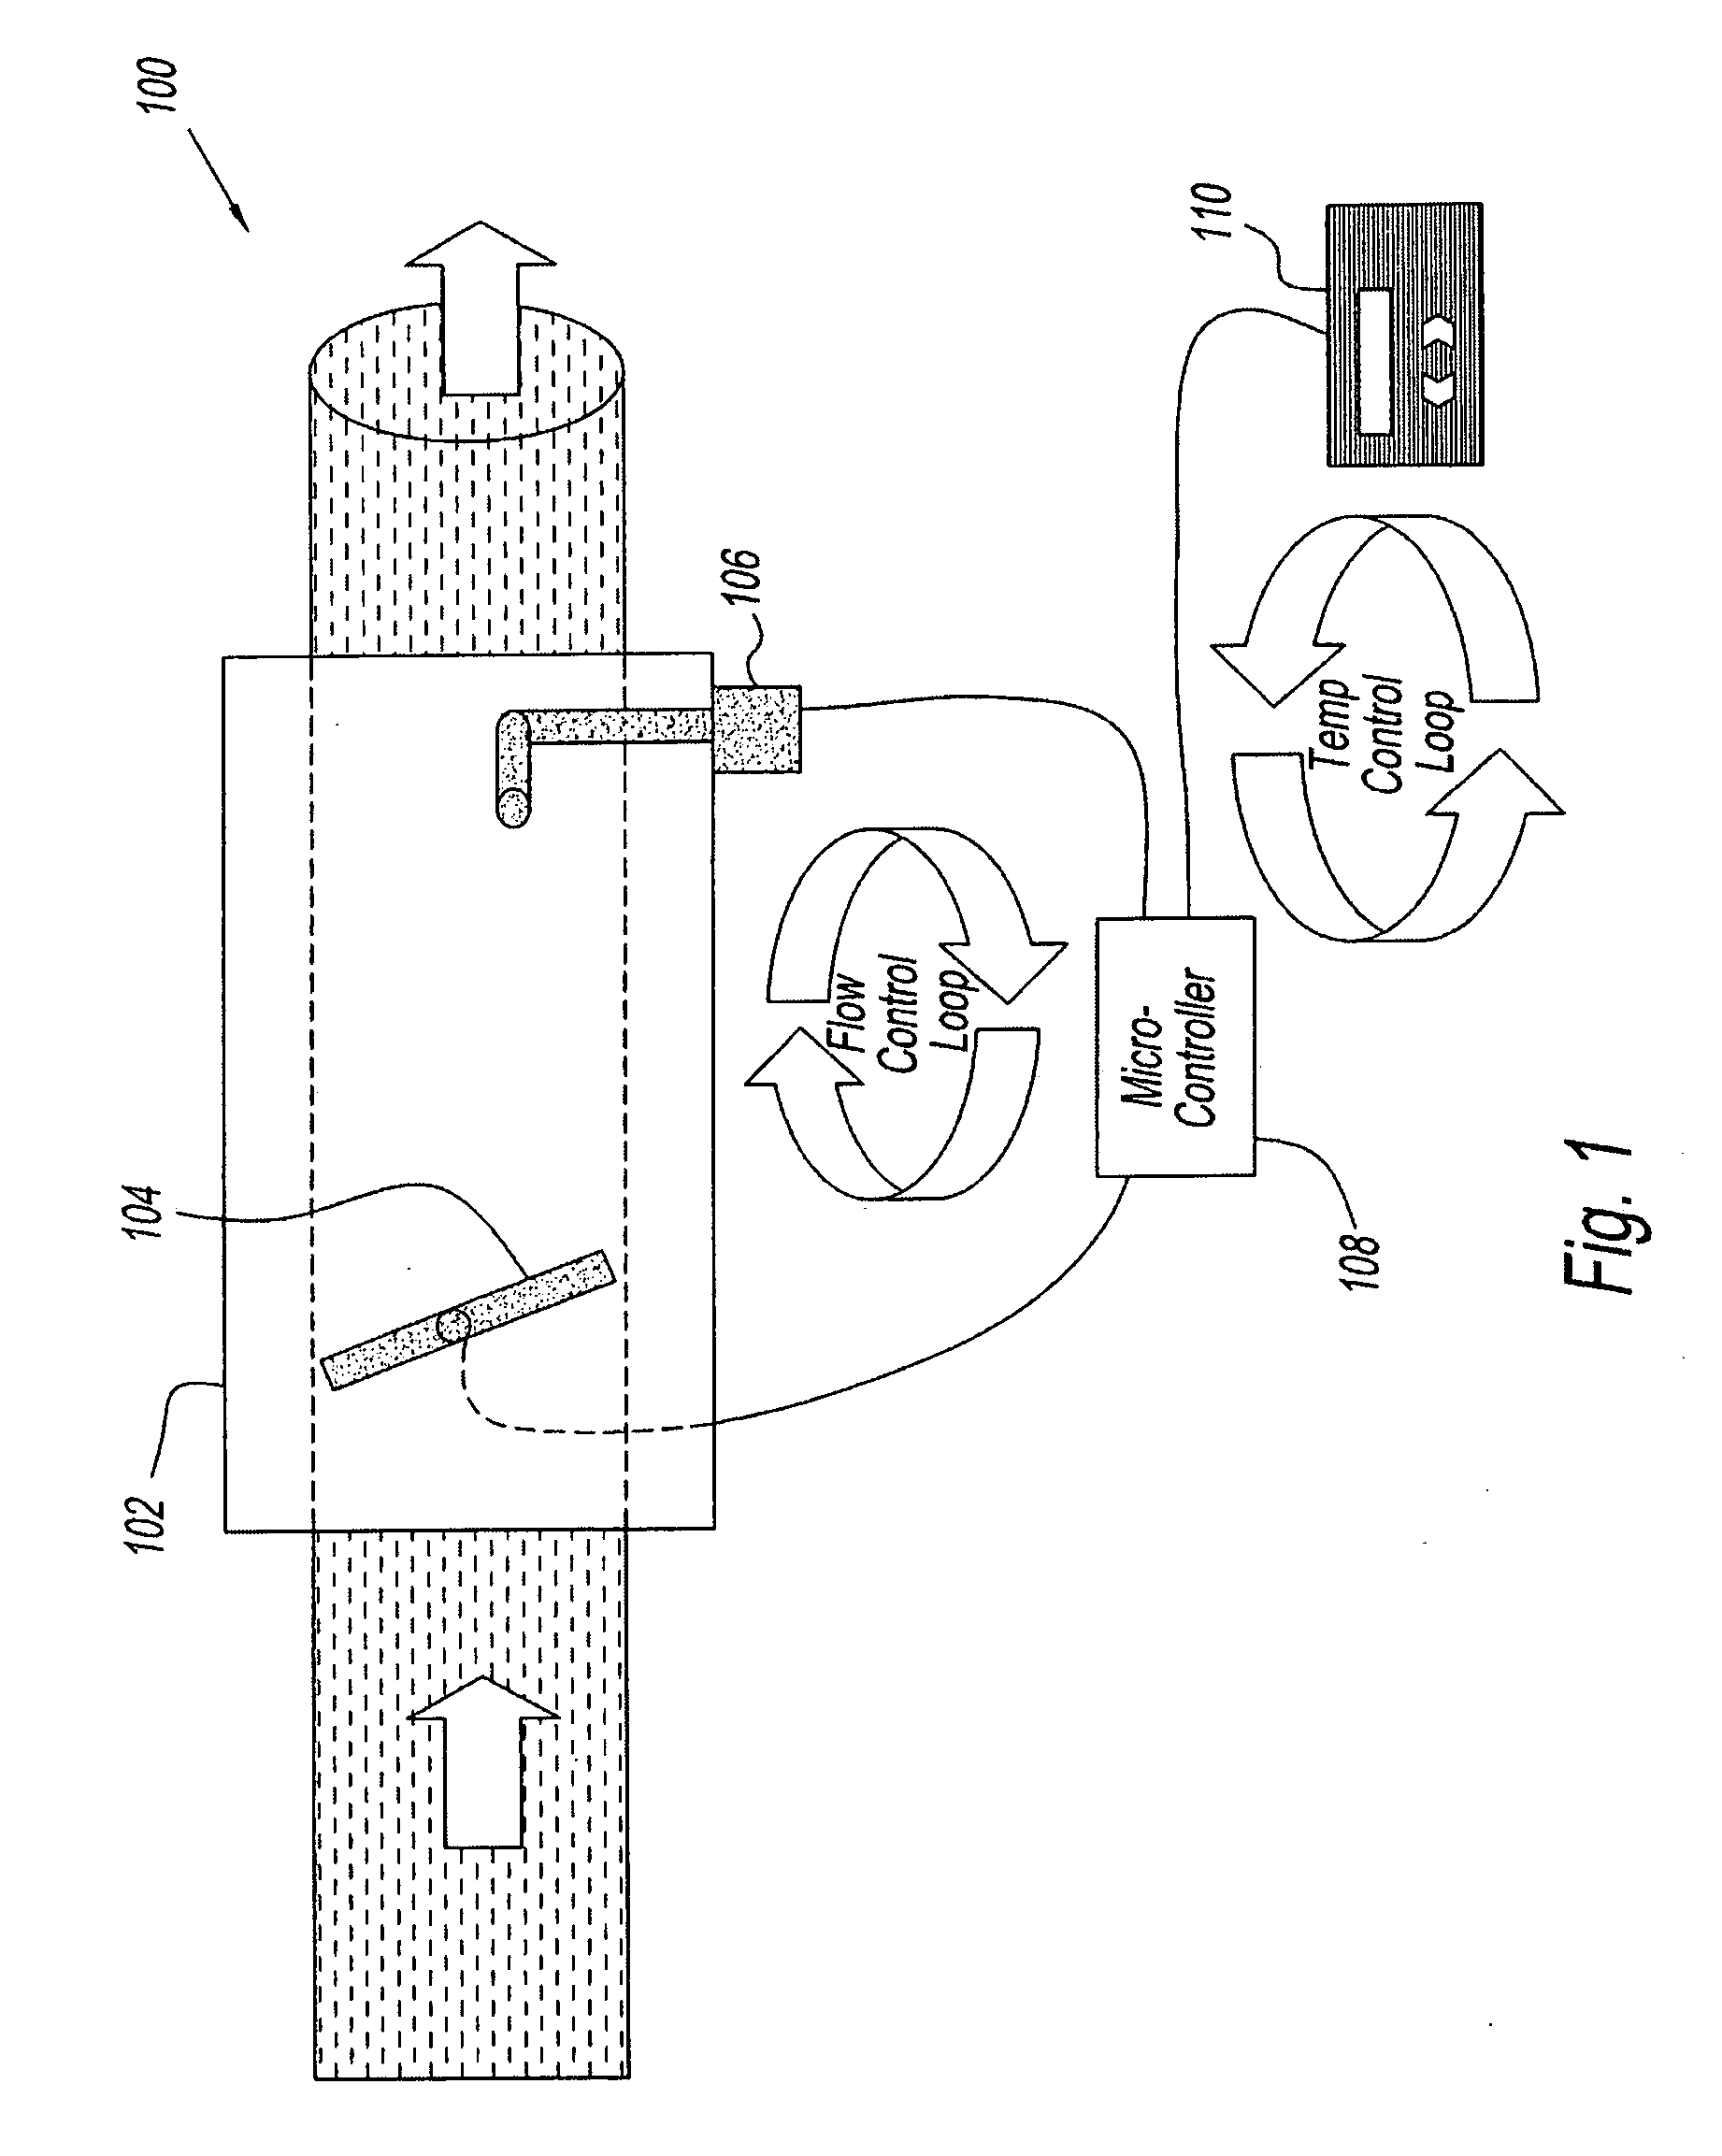 Slope predictive control and digital PID control for a variable temperature control system